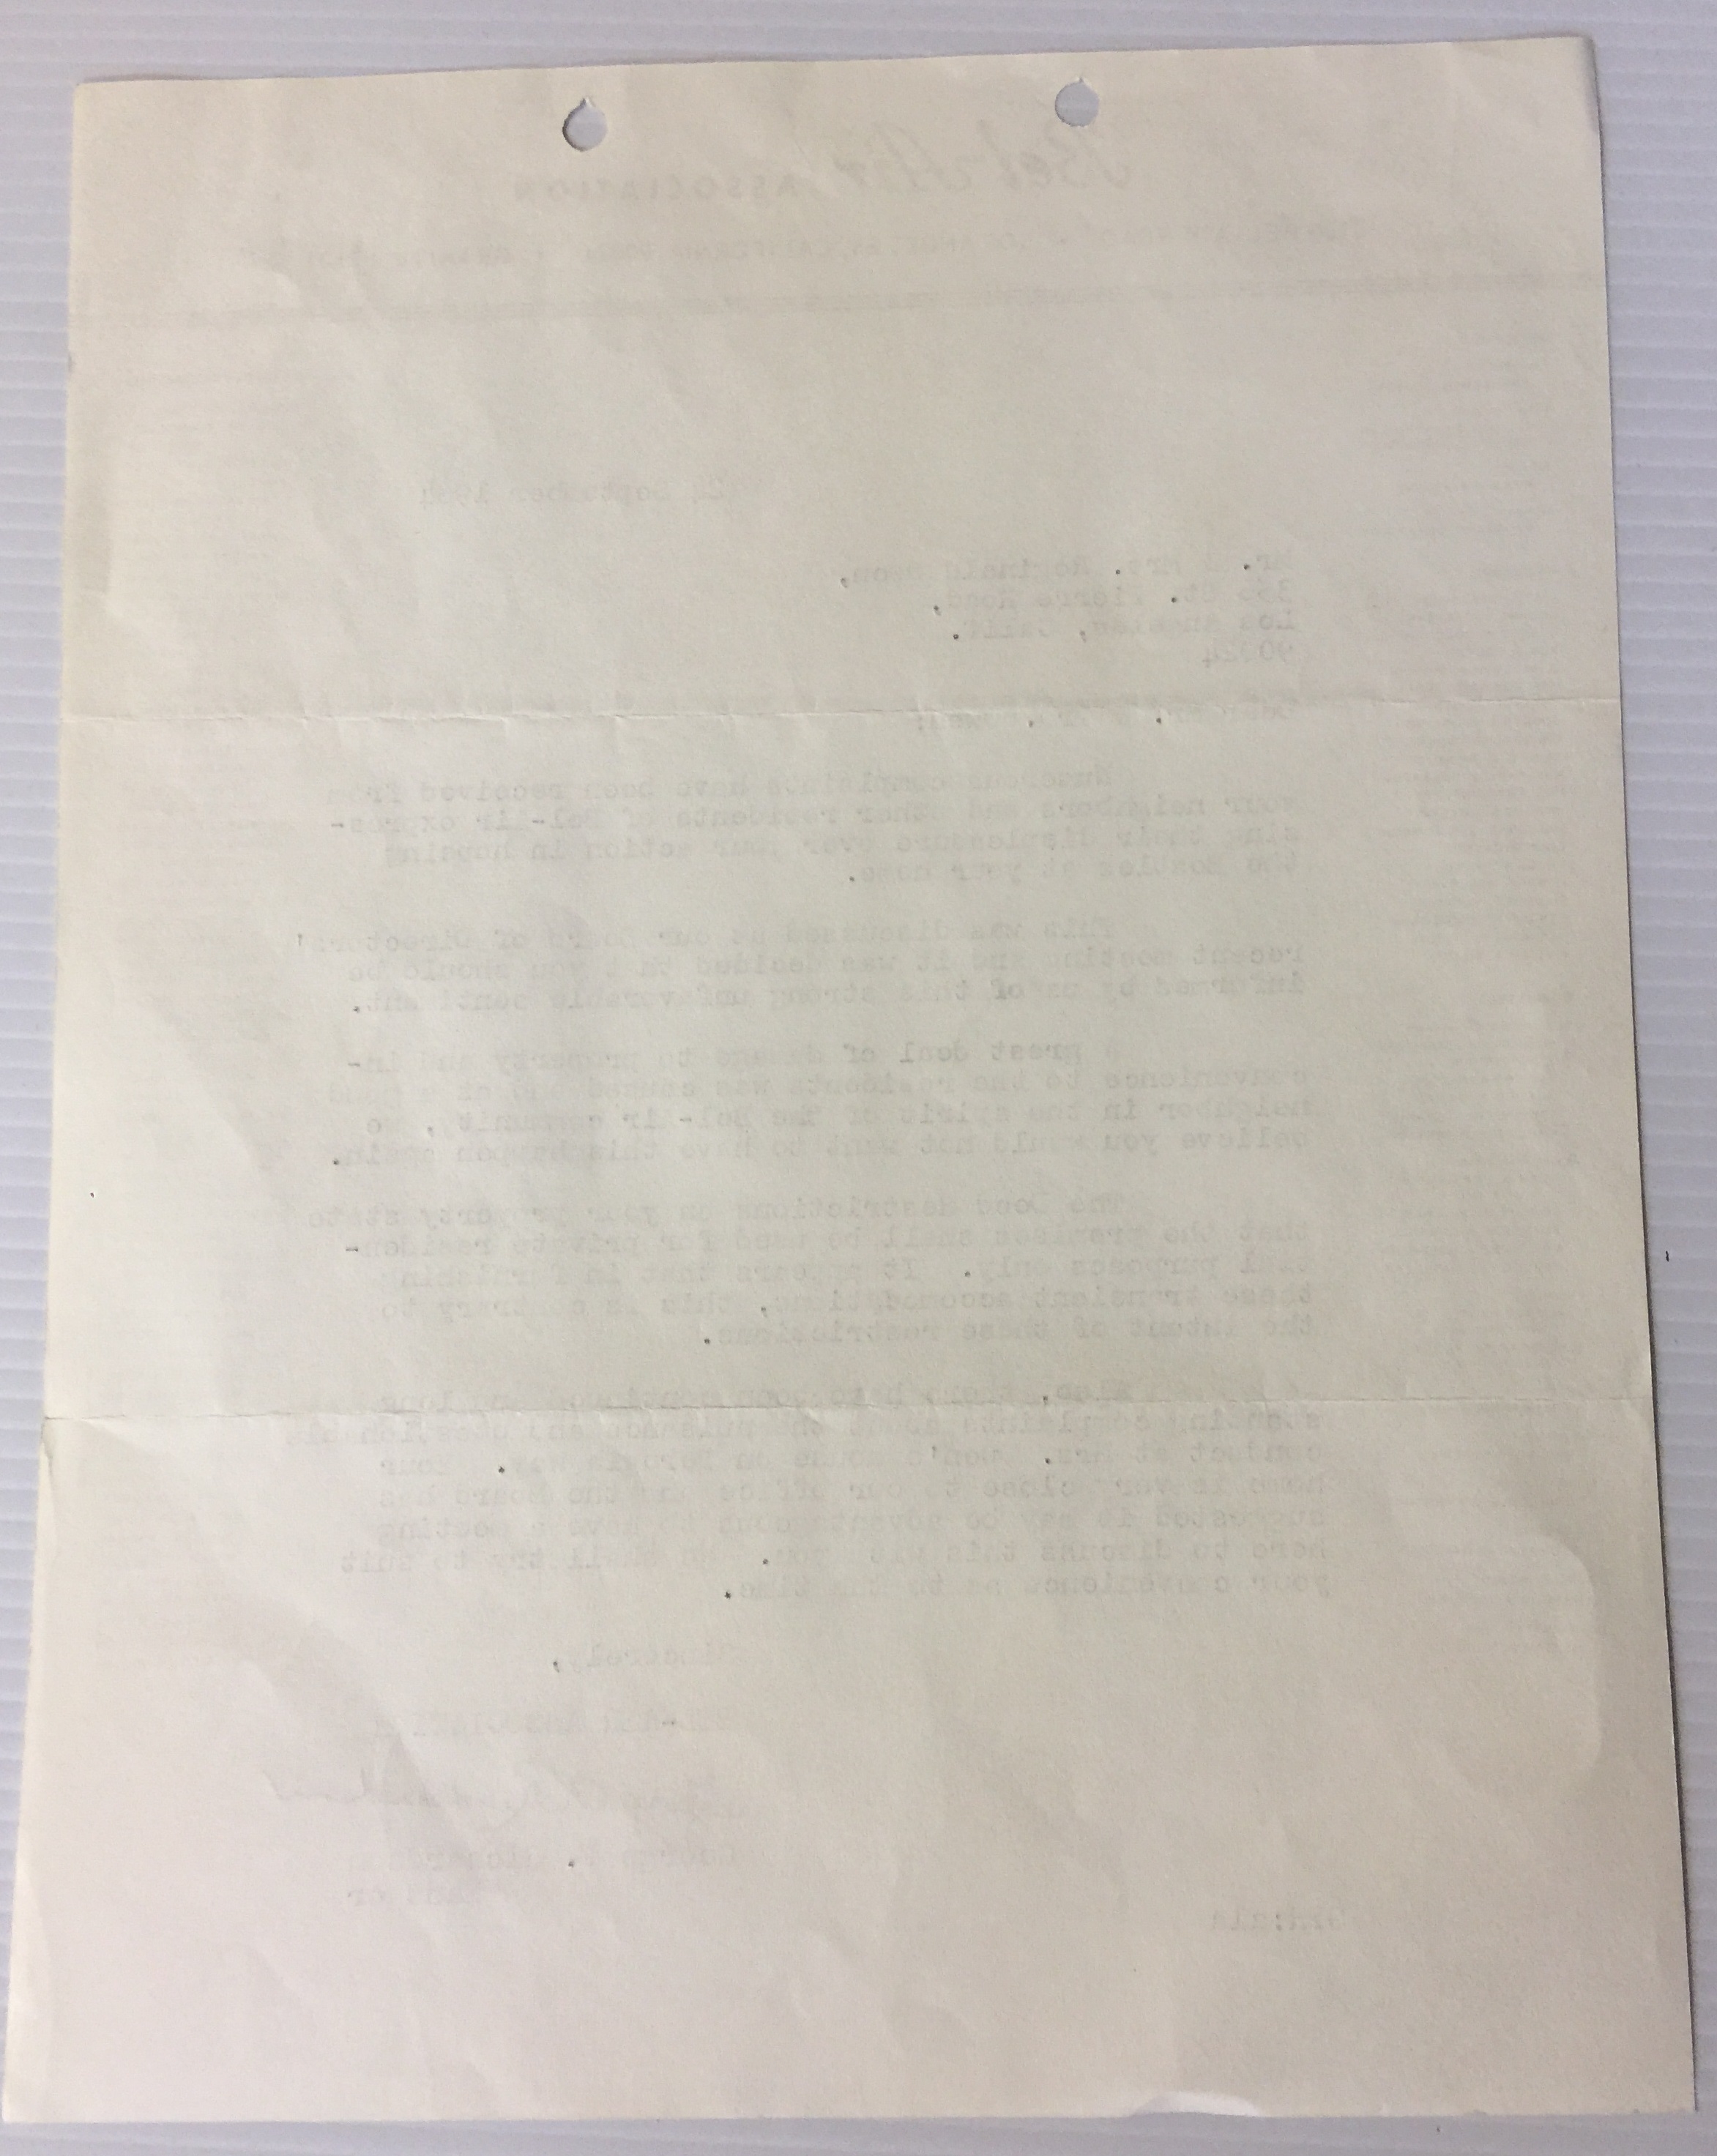 BEATLES LETTER OF COMPLAINT - original hand signed letter written from the "Bel-Air Association" to - Image 2 of 2